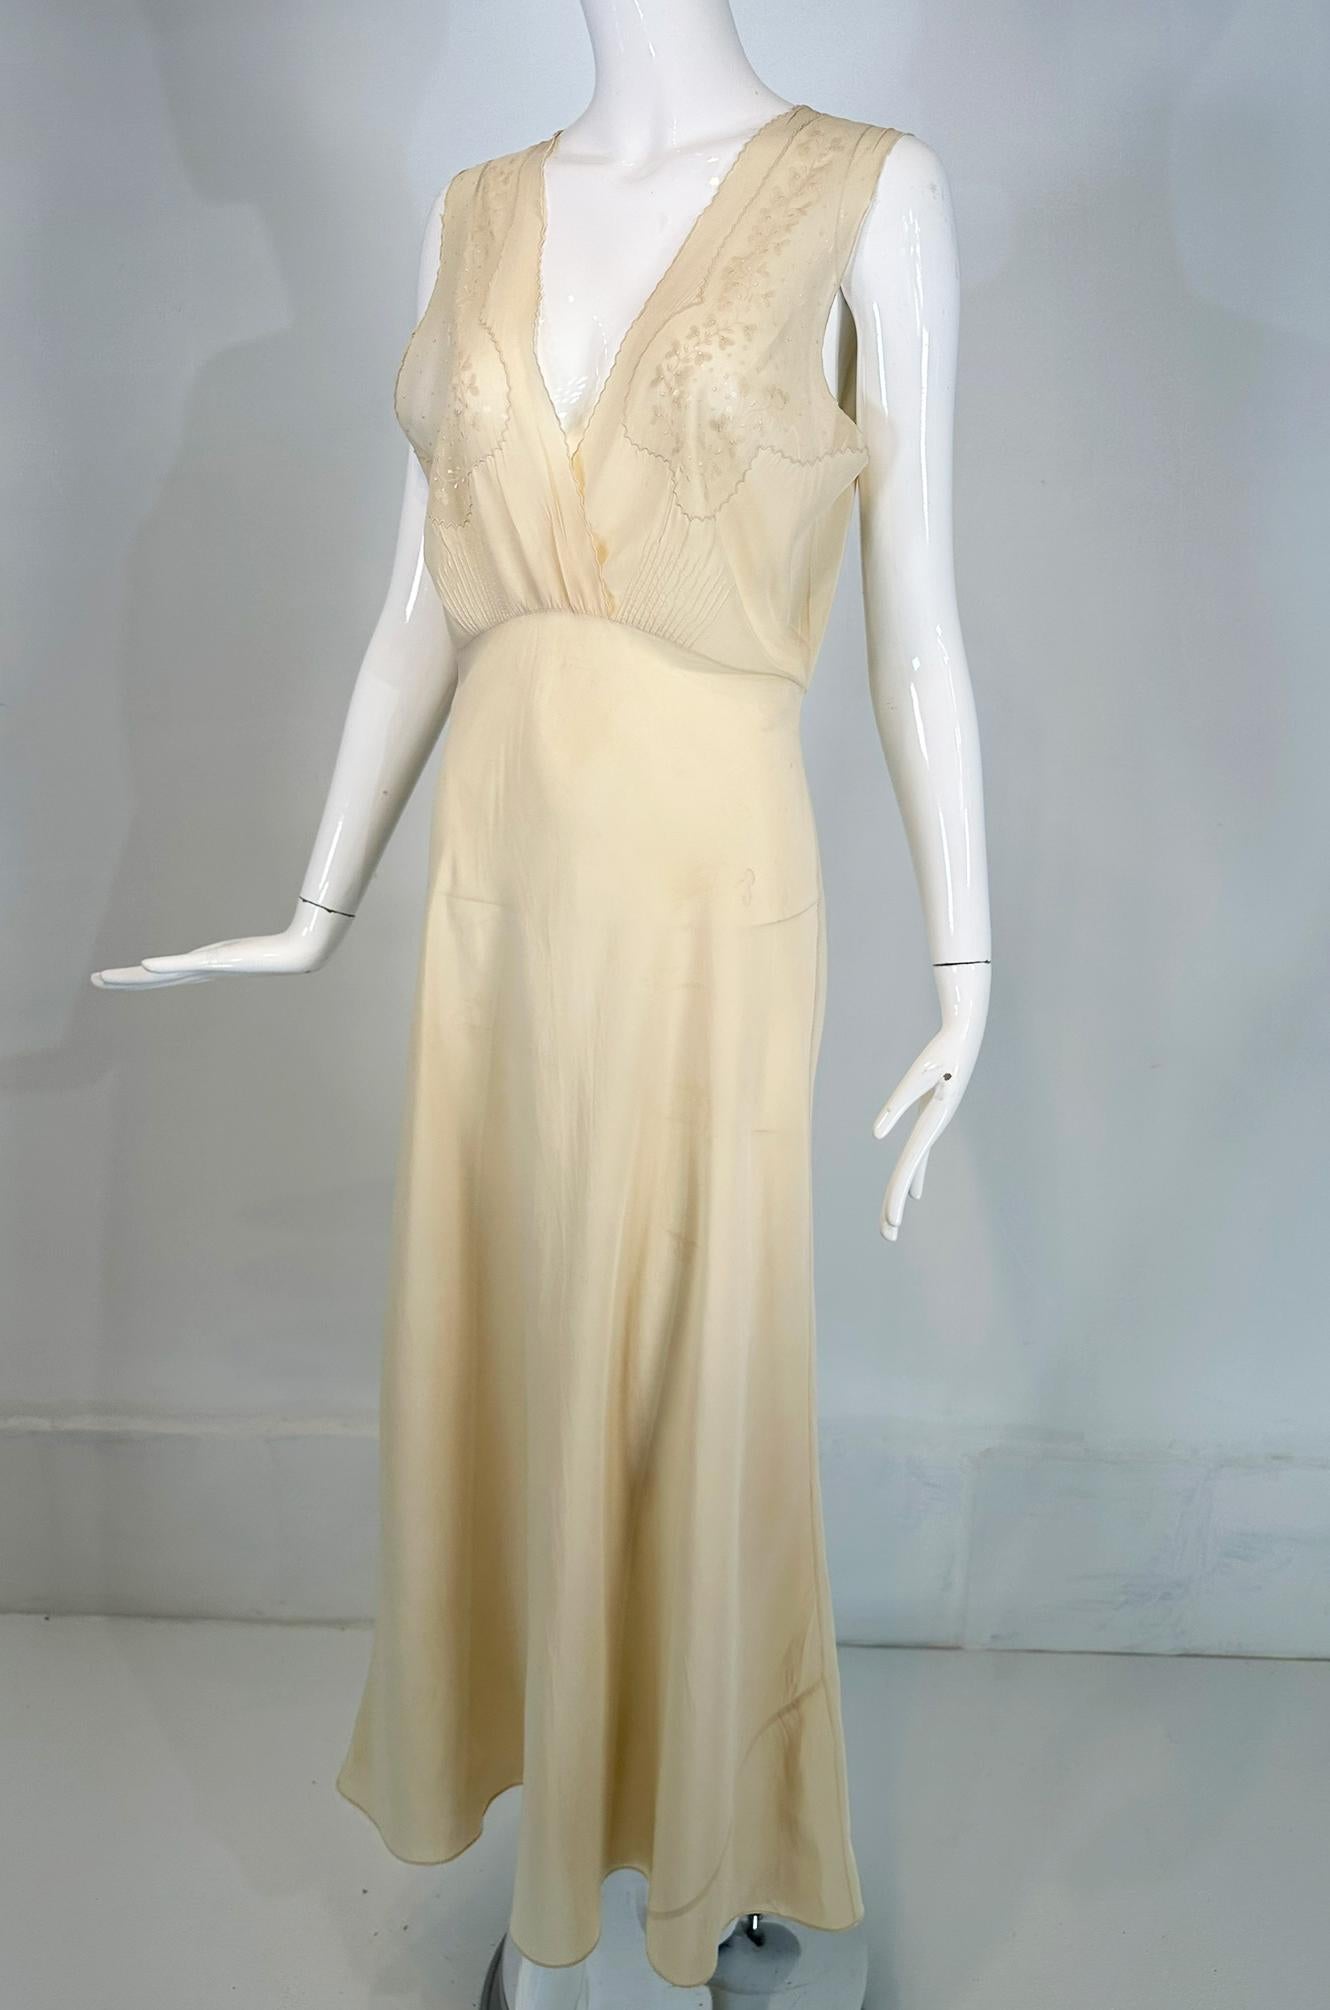 1930s Cream Bias Cut Sheer Silk Hand Embroidered & Appliqued Slip Dress Gown For Sale 10